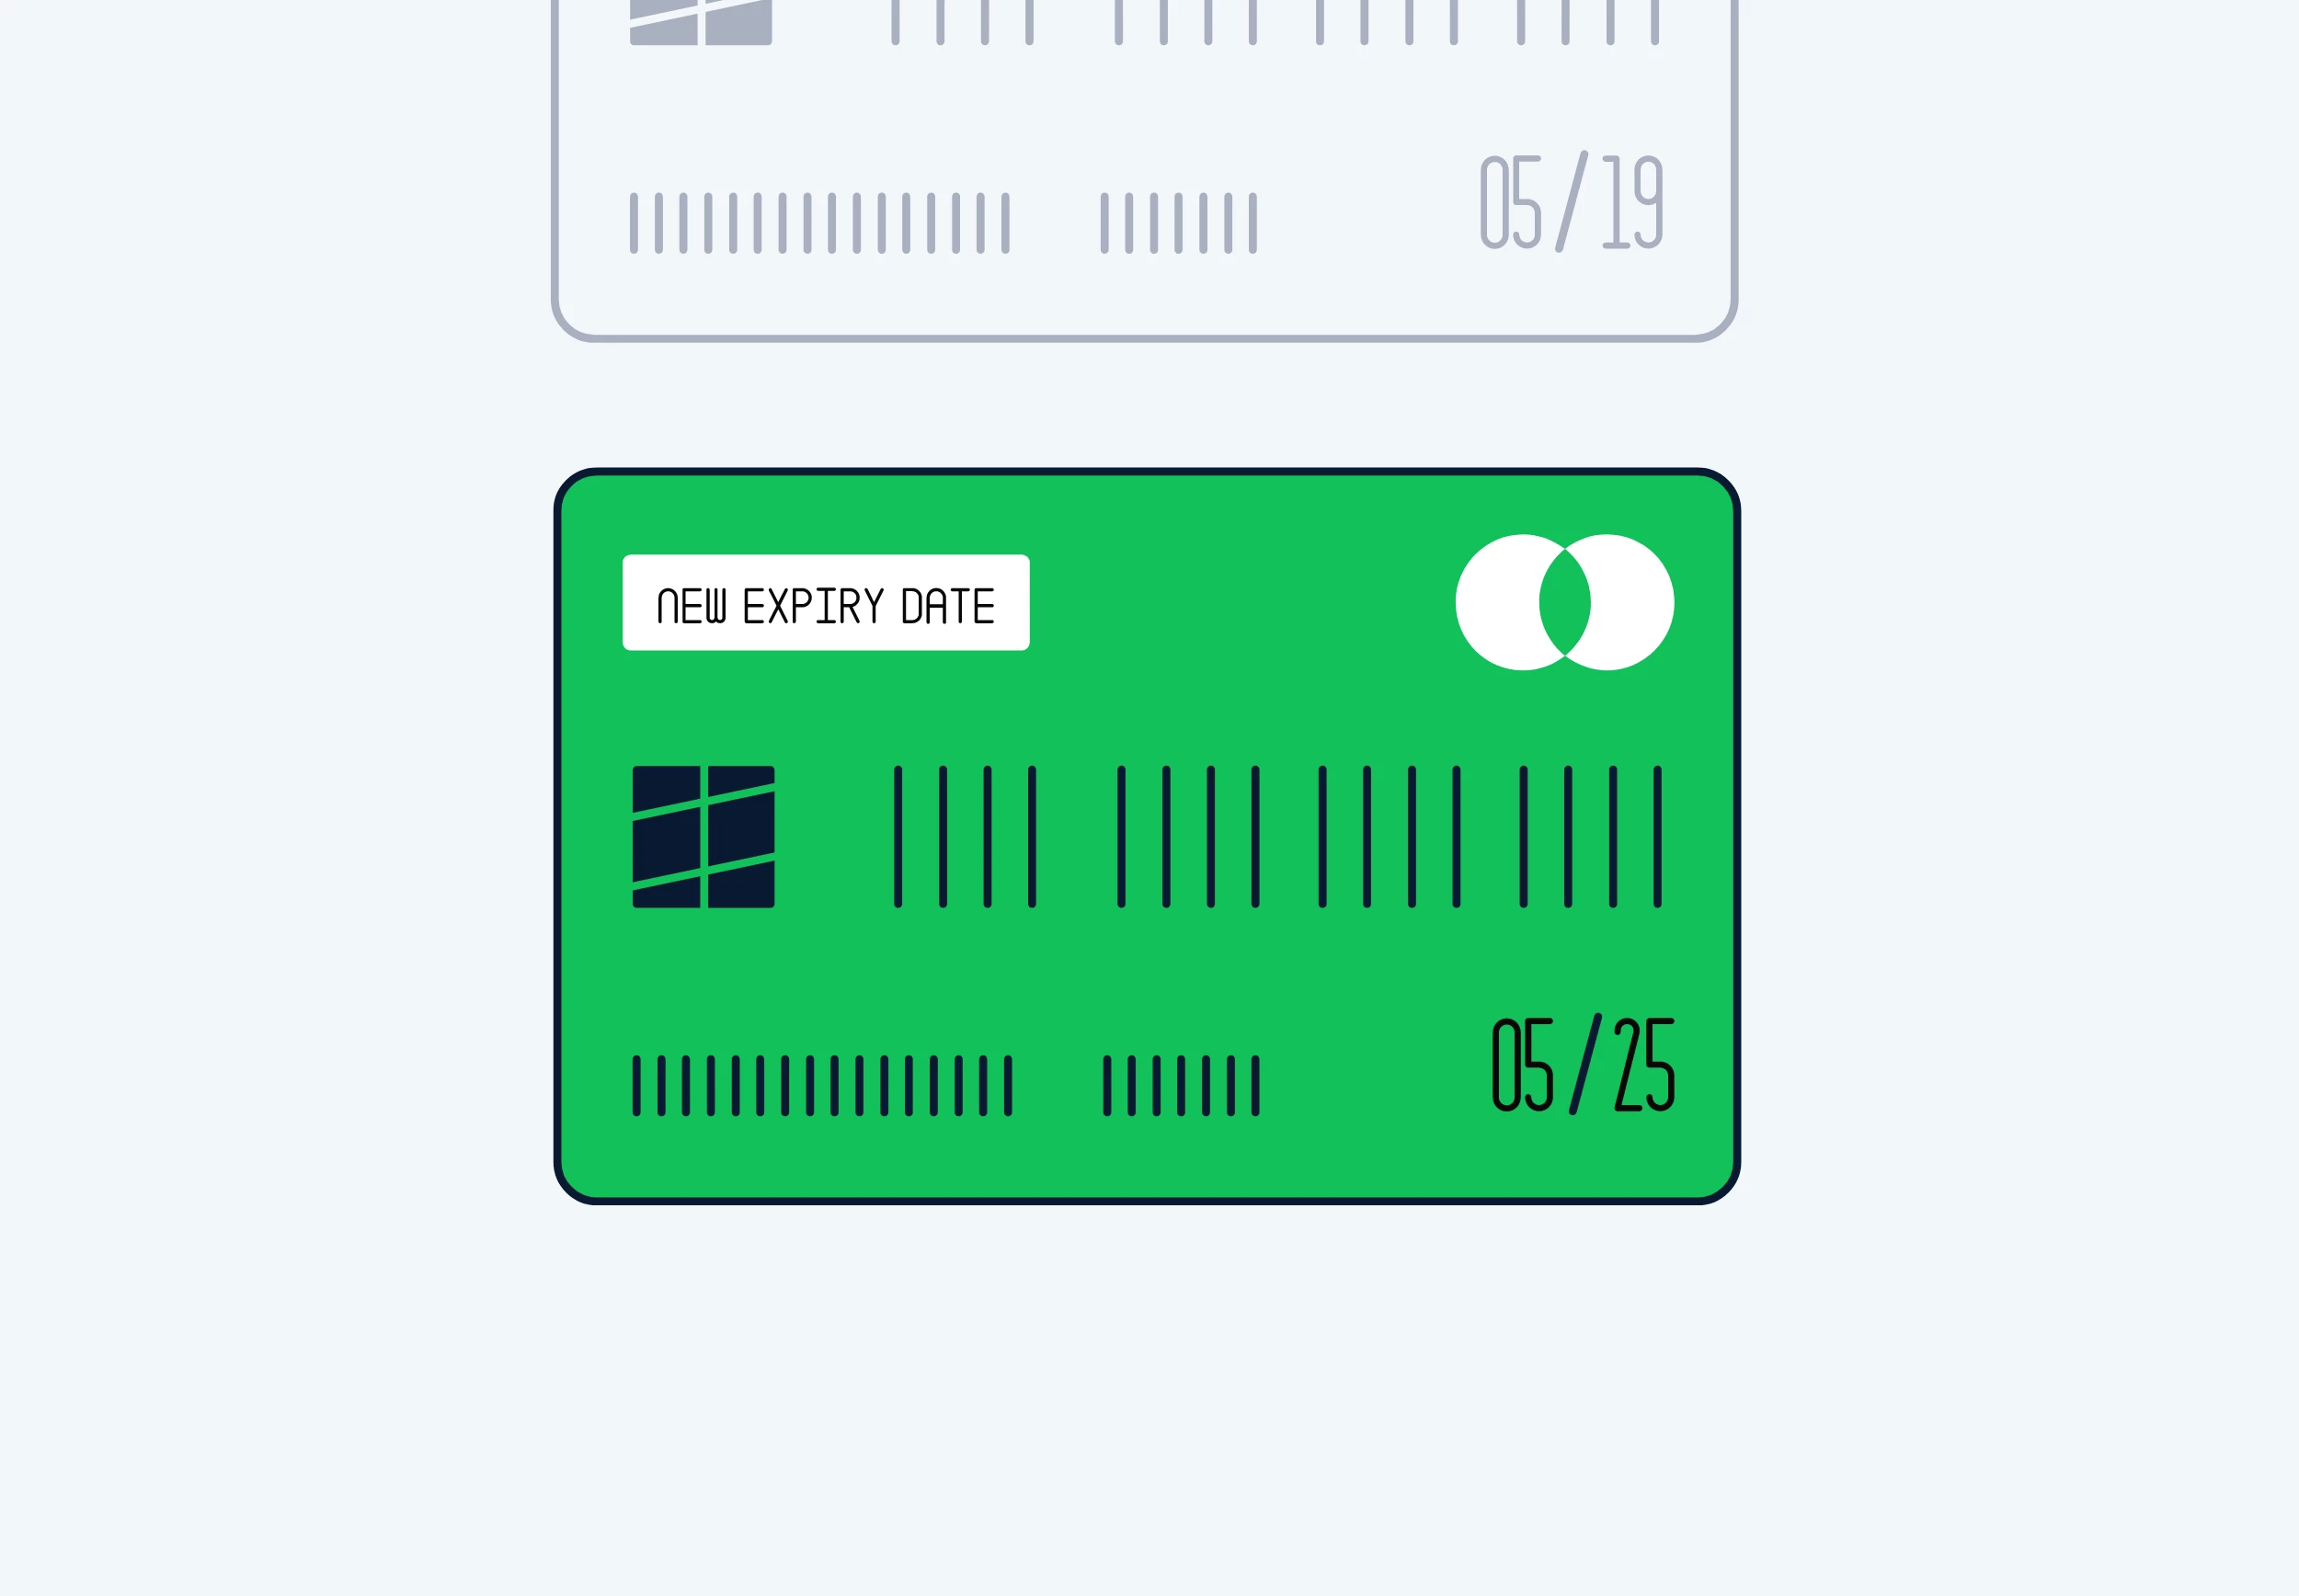 Illustration of card with a new expiration date